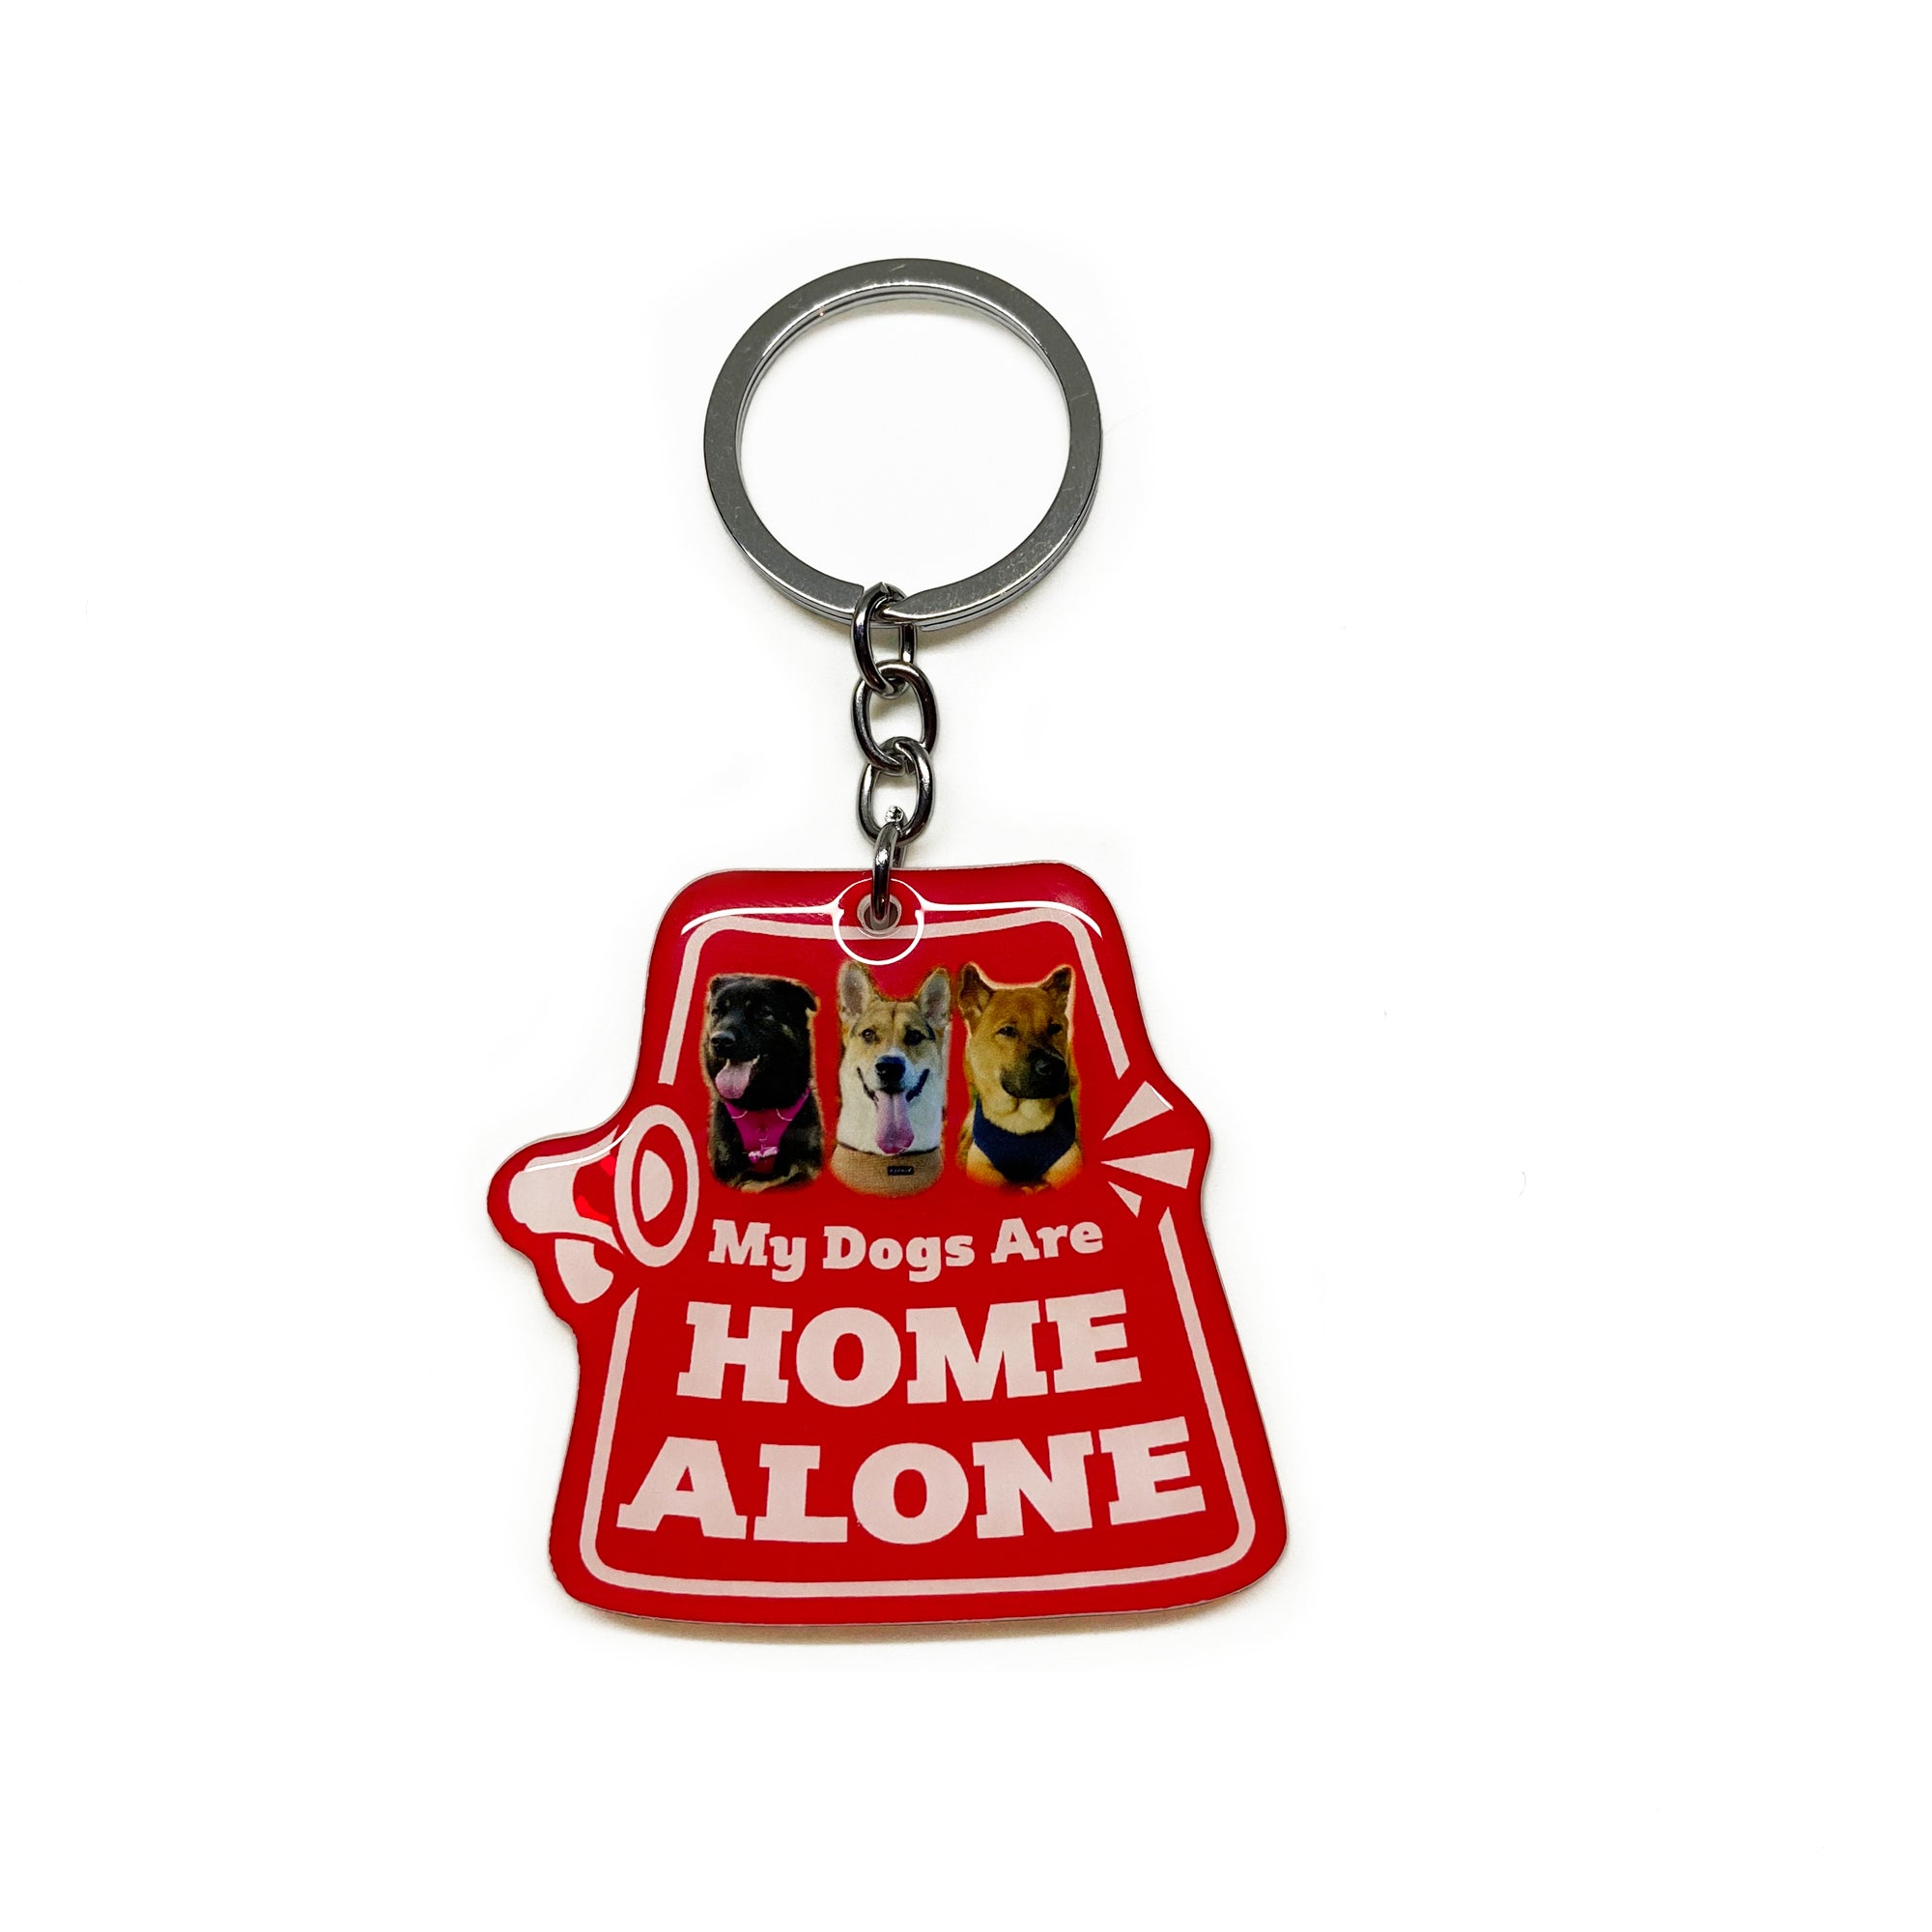 My Pet Is Home Alone Alert Keychain, Emergency Pet Keyring Tag, Emergency Contact Keychain Long Rectangular Tag